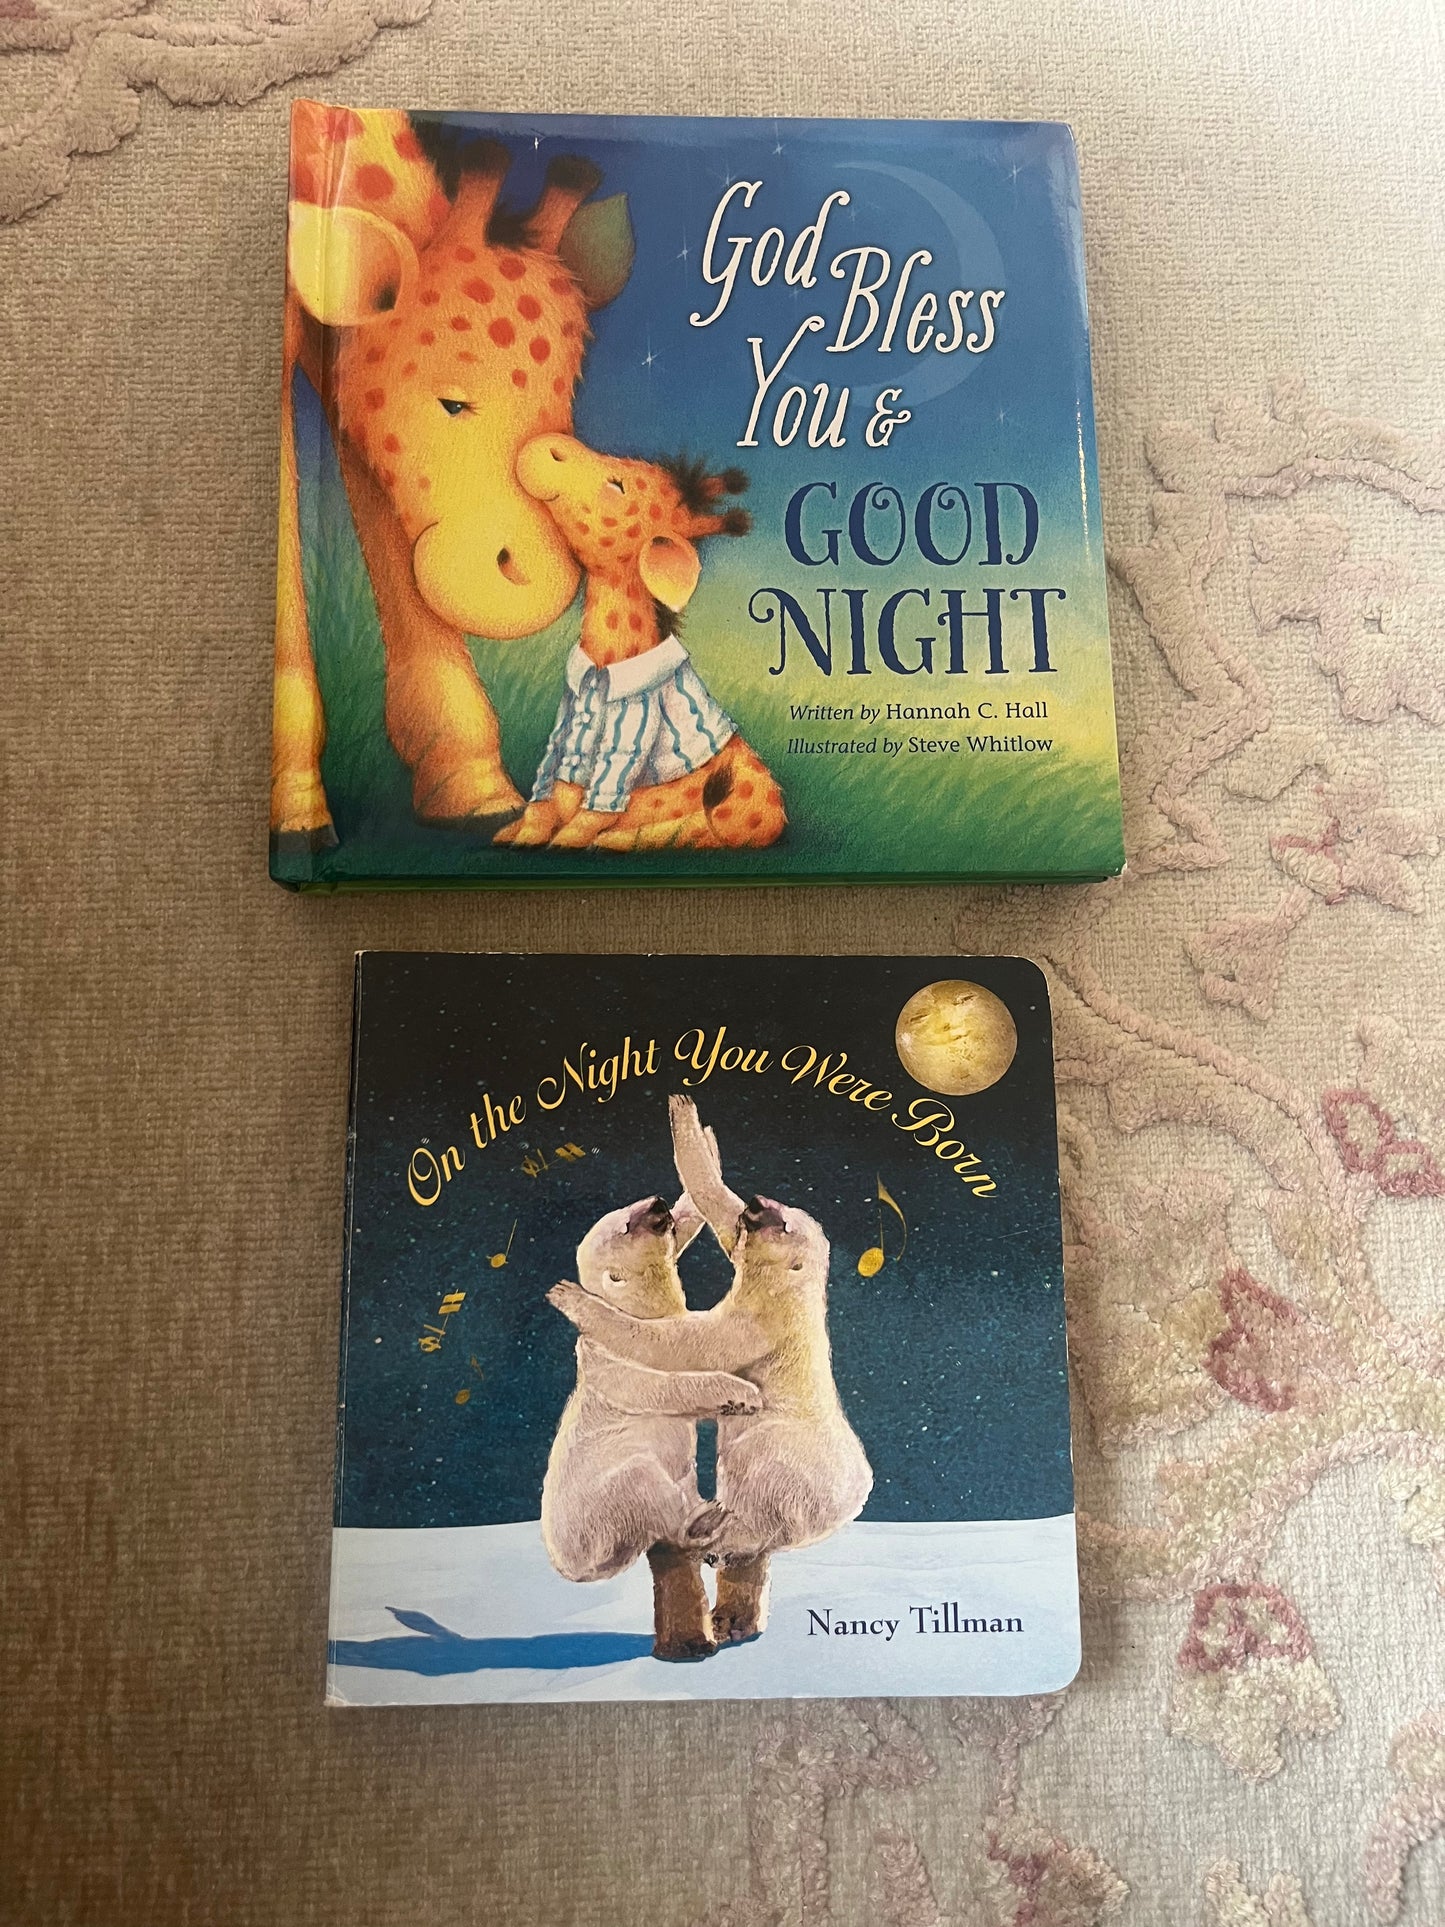 The night you were born: baby Book Bundle